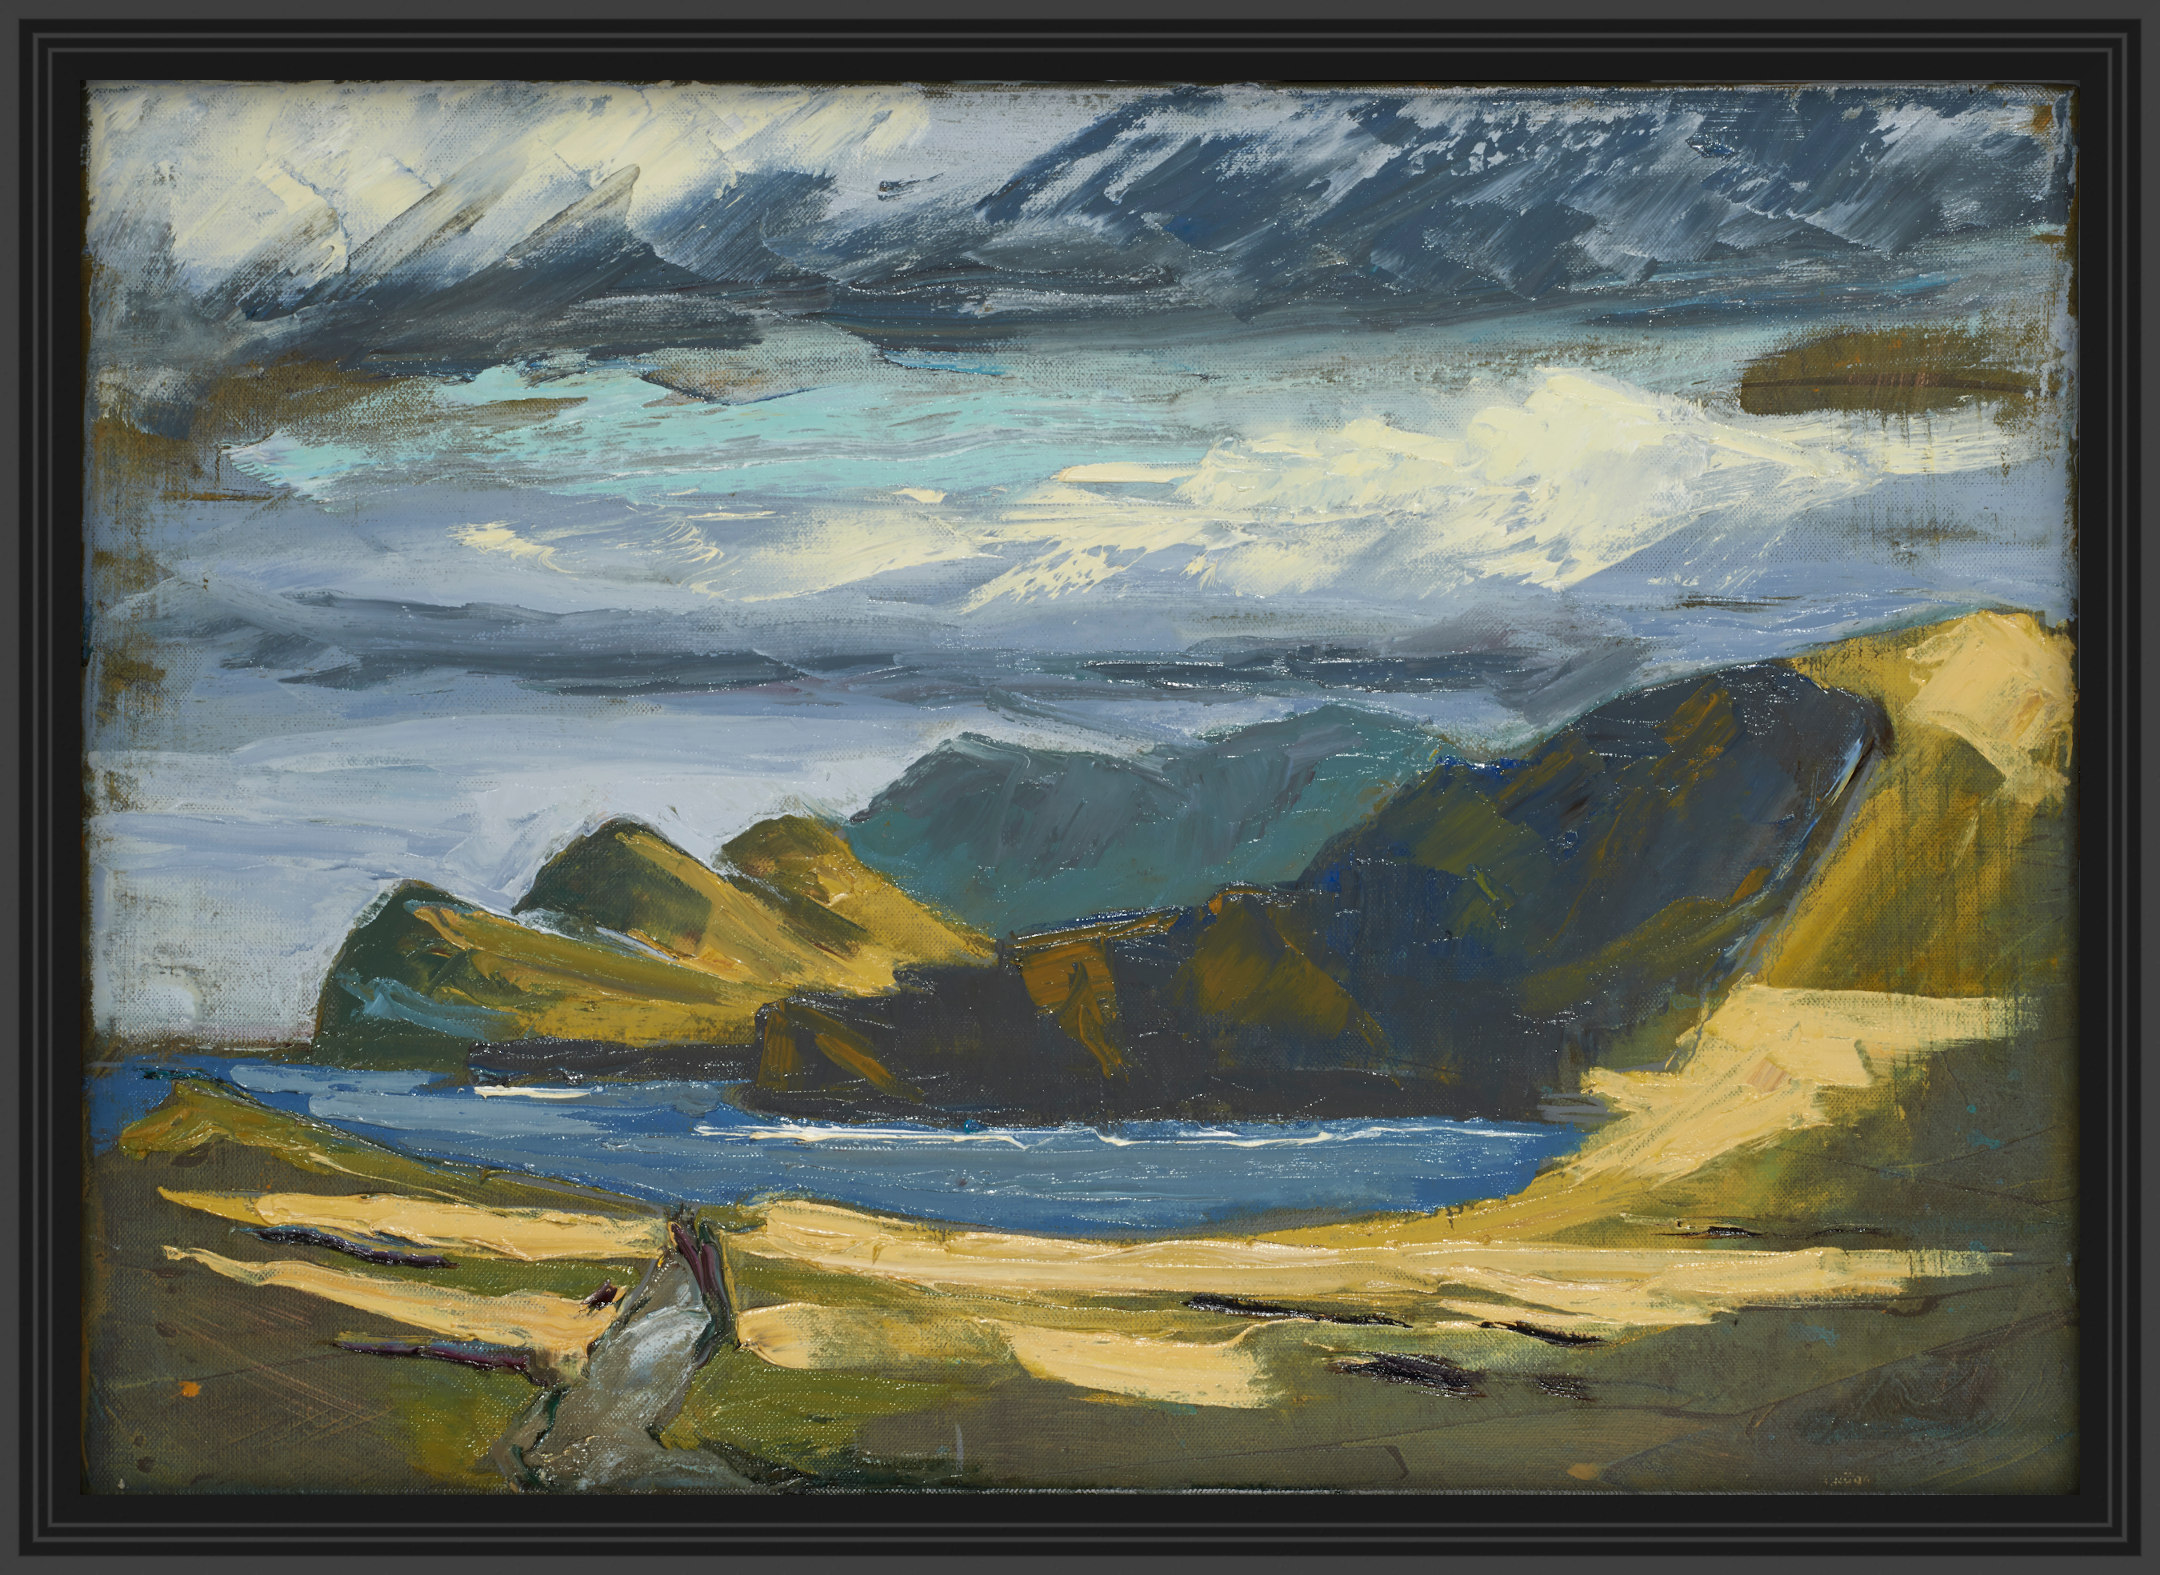 artist rod coyne's painting "three sisters" is shown here in a black frame.